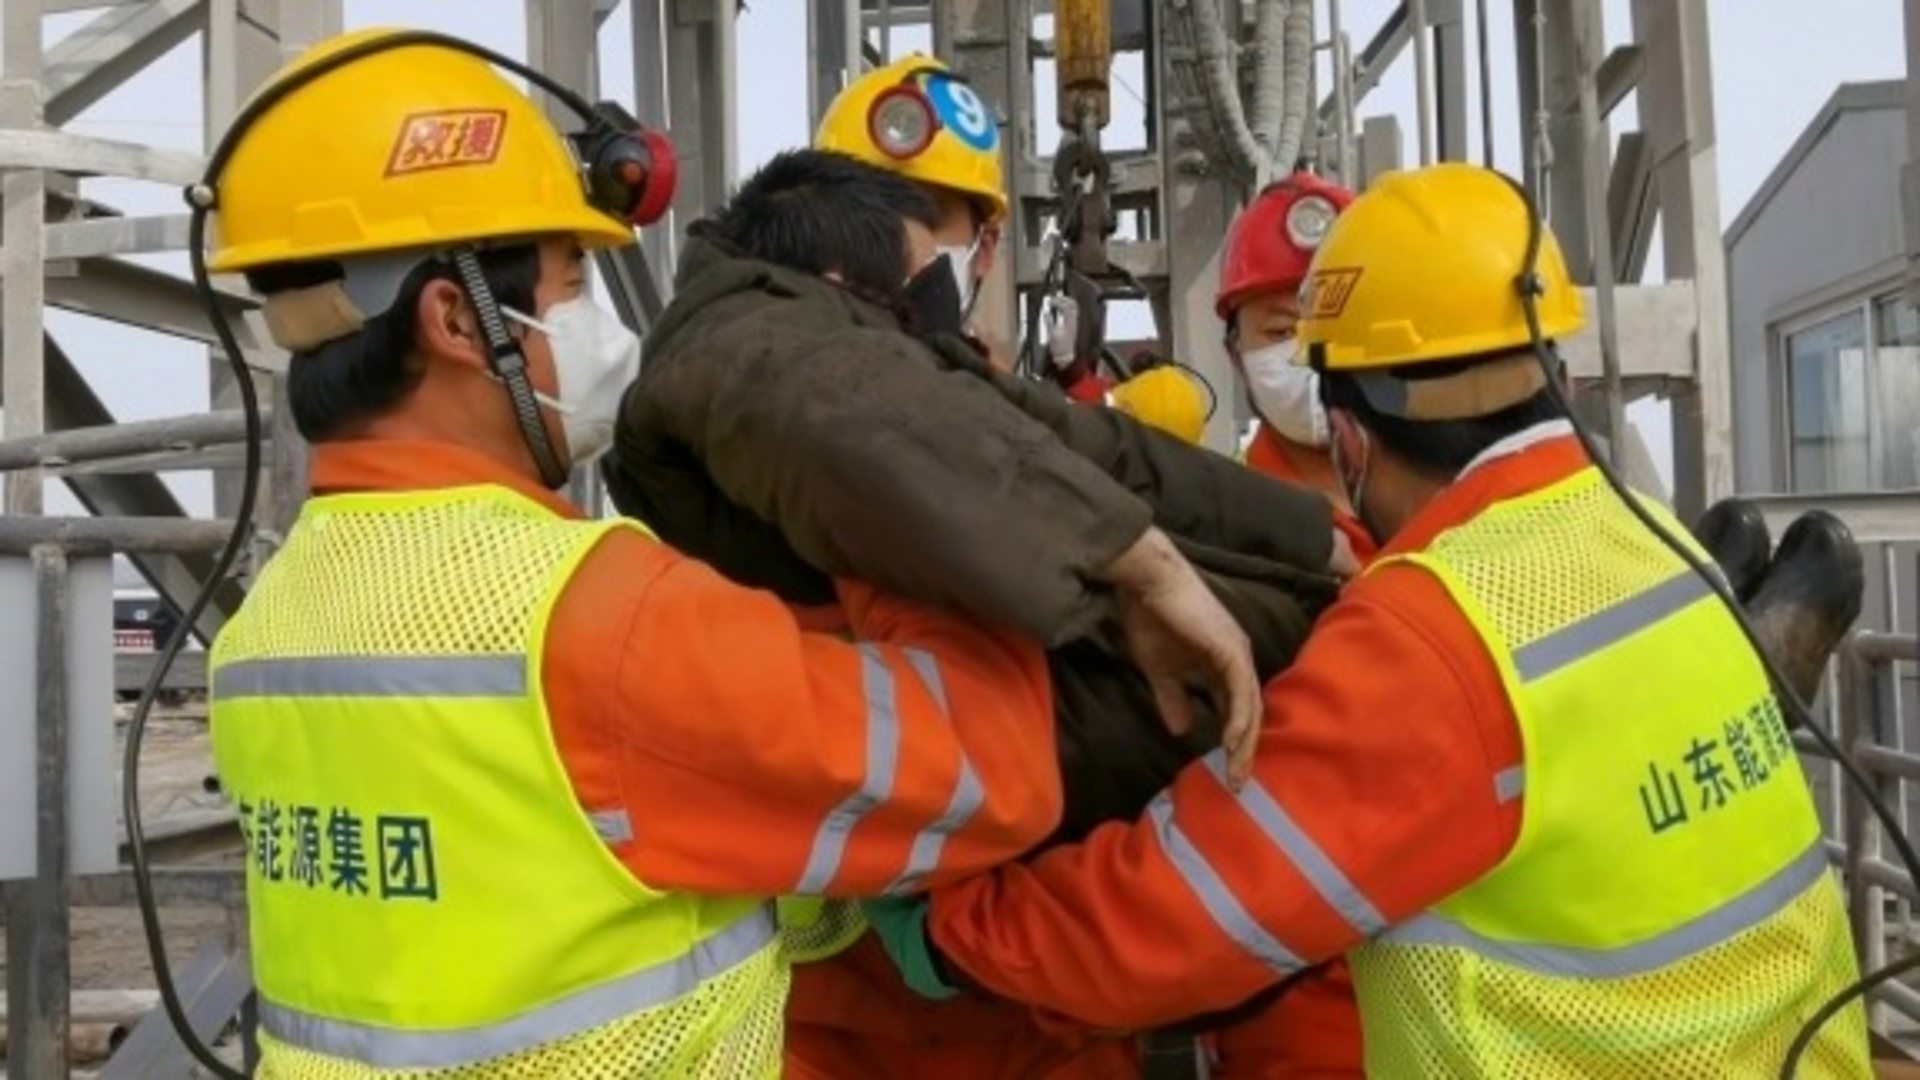 The moment a miner is rescued from China gold mine